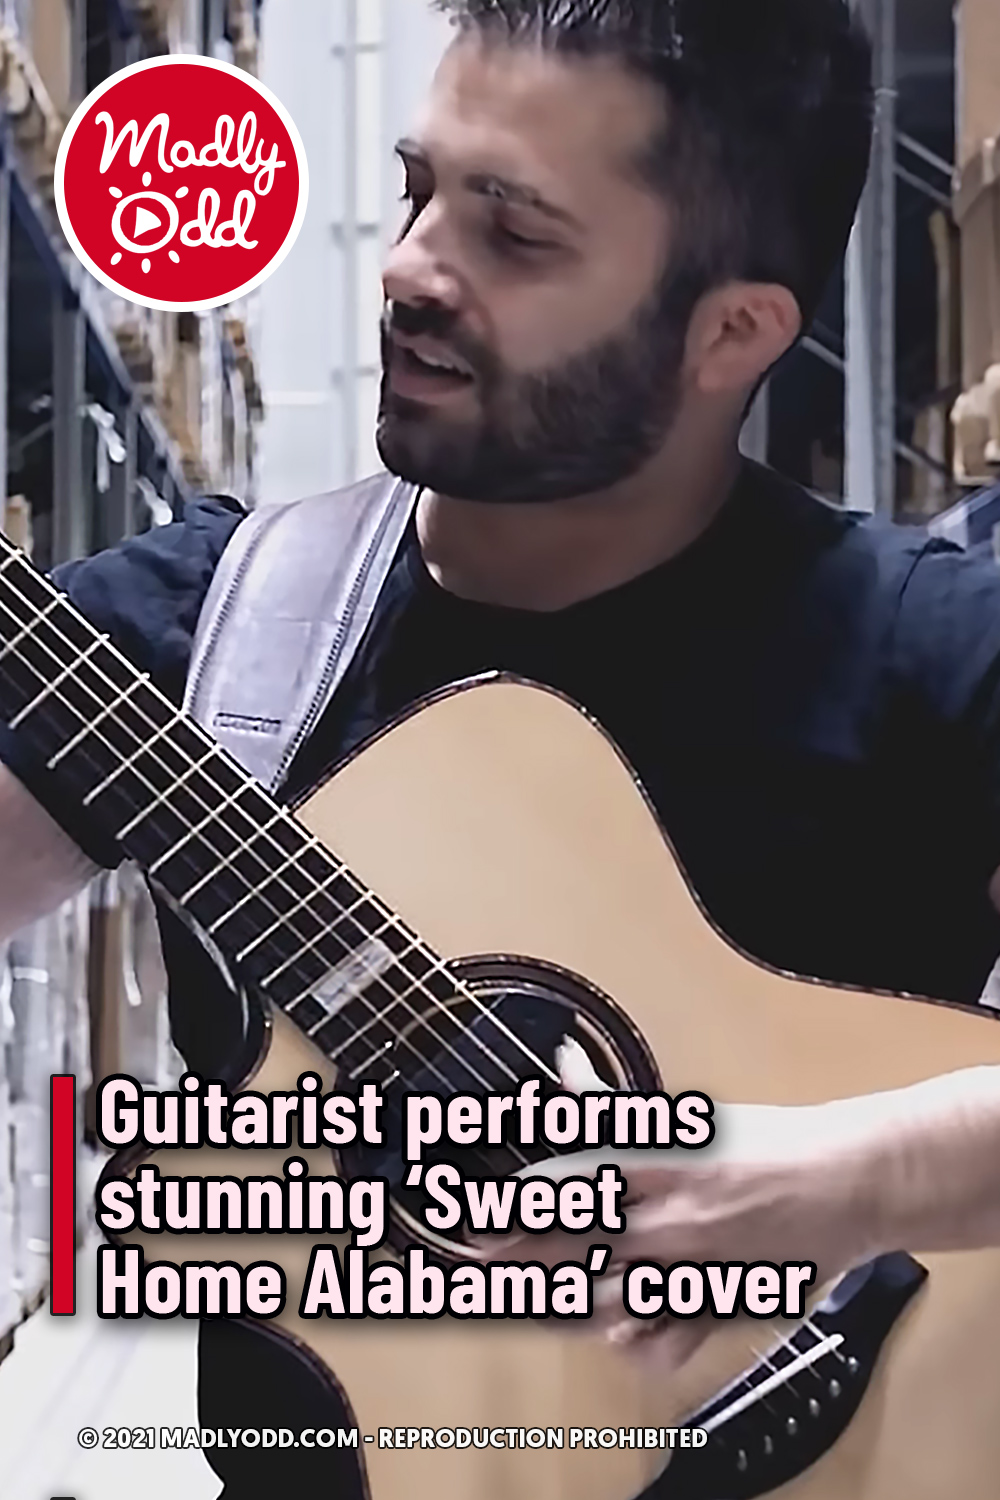 Guitarist performs stunning ‘Sweet Home Alabama’ cover